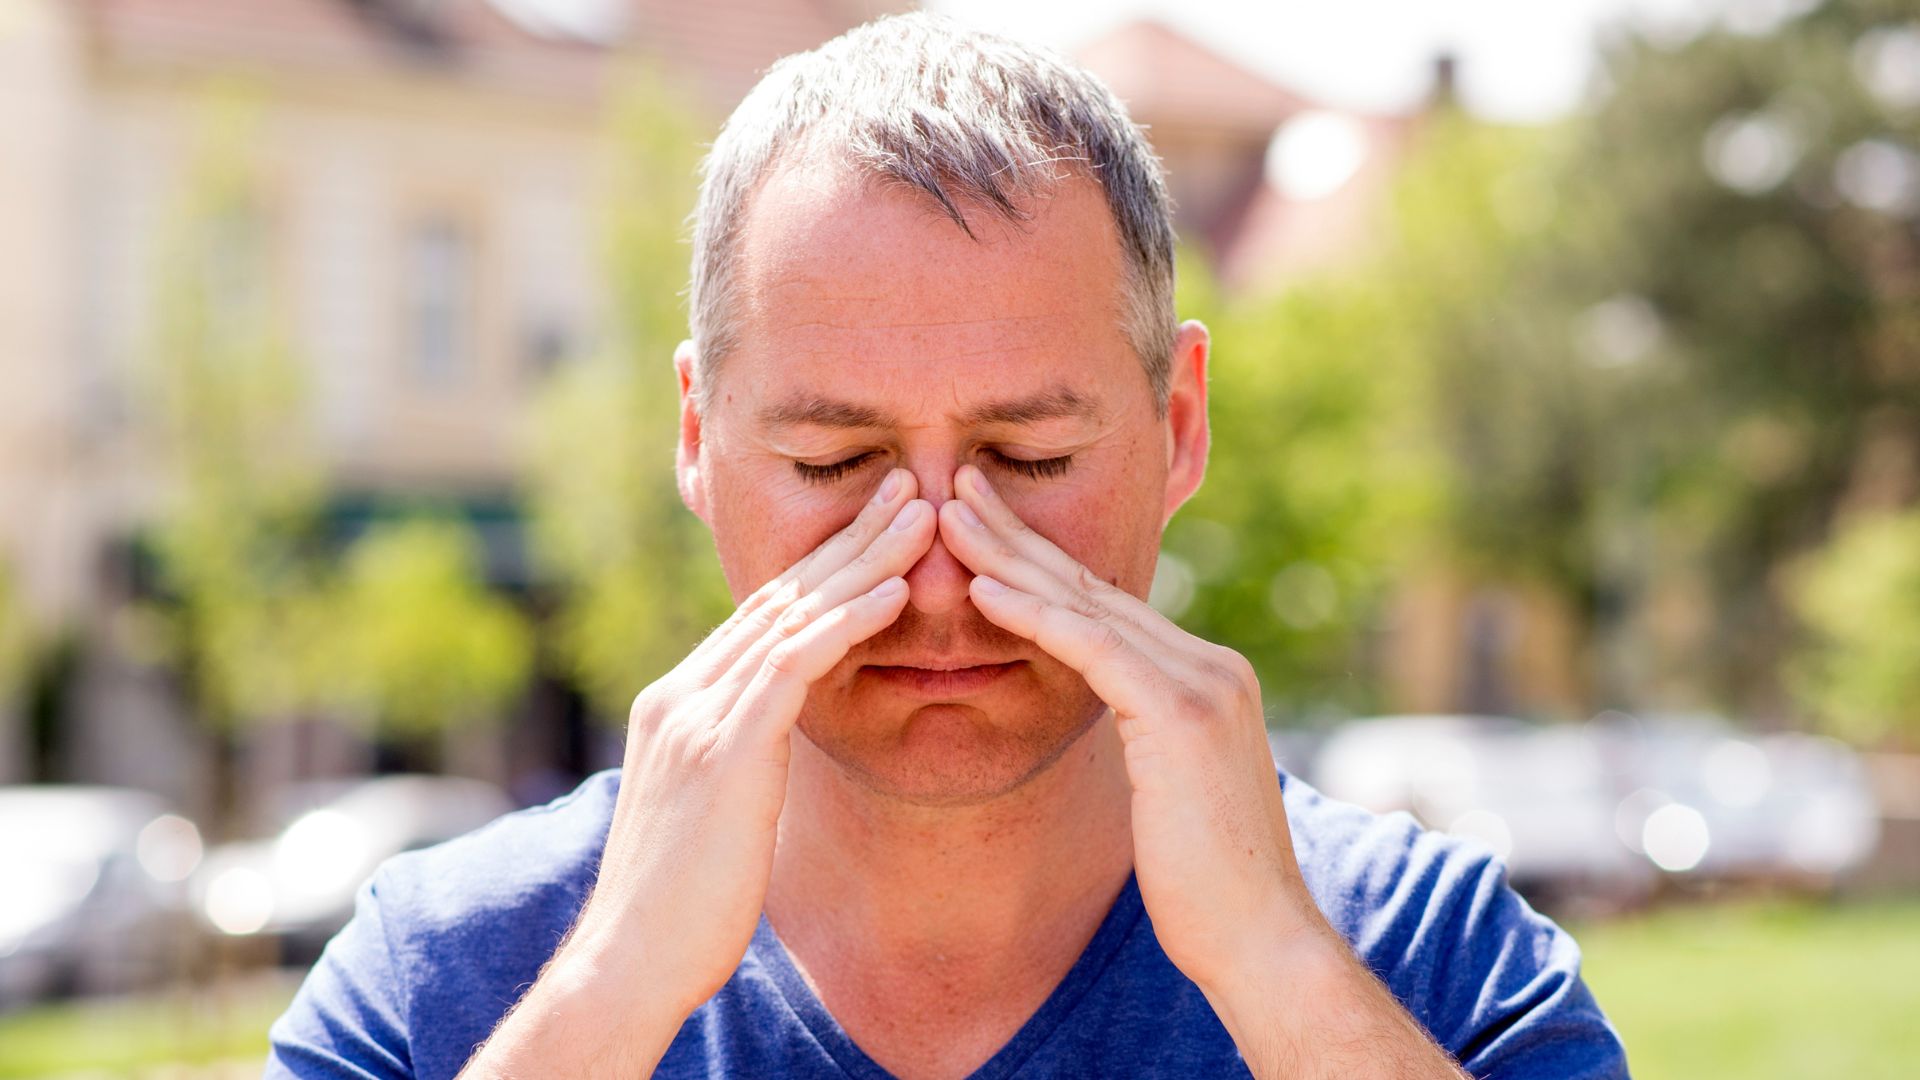 Natural Remedies for Sinusitis: What Really Works?